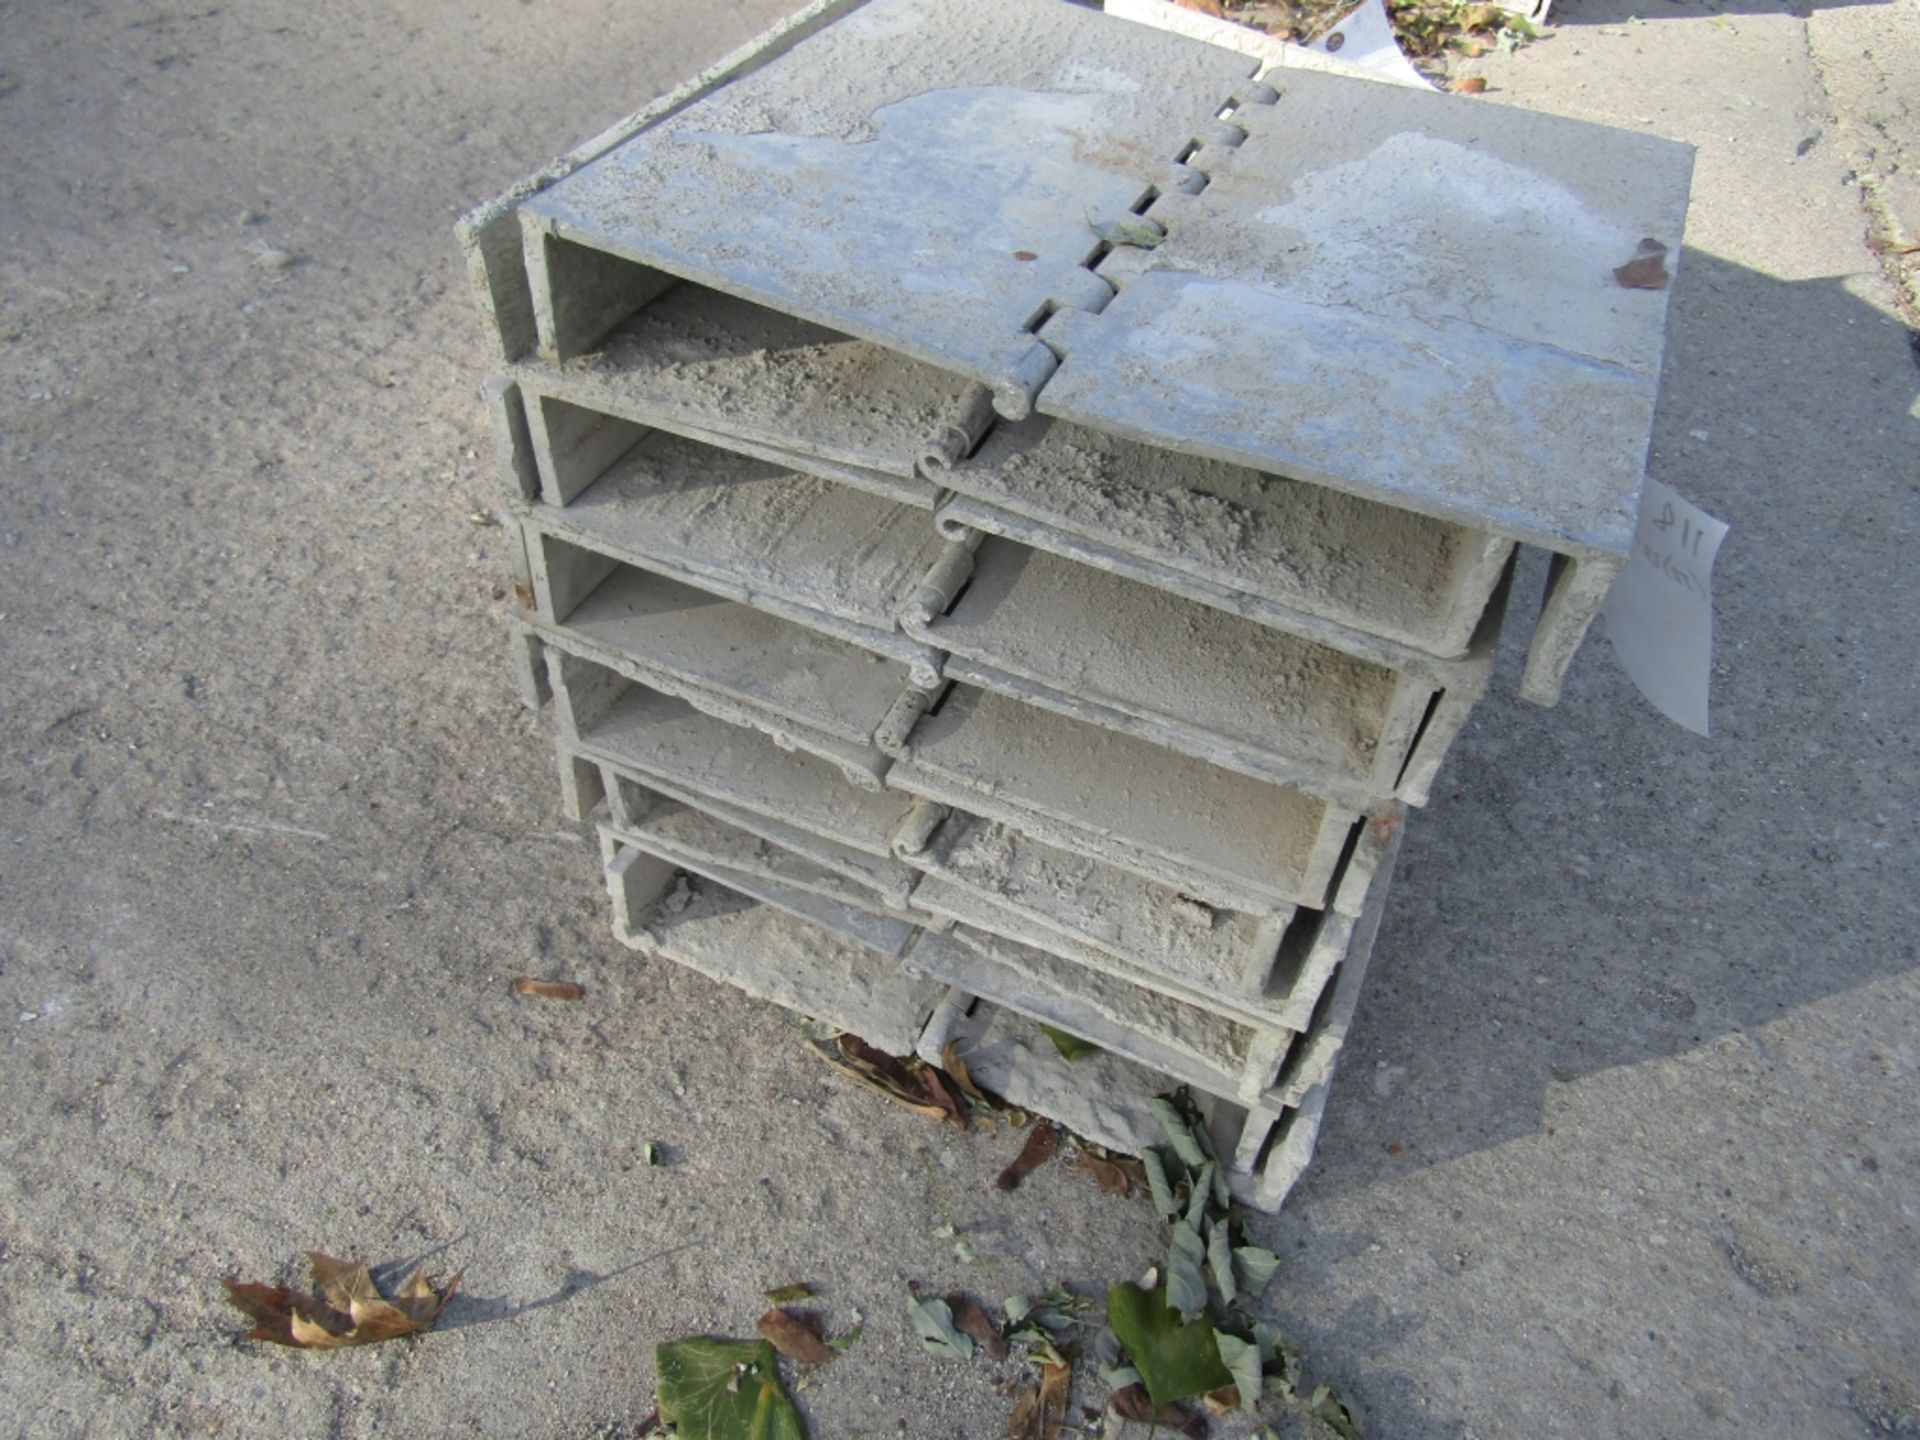 (12) 13" x 2" x 1'Durand Cap Concrete Forms Hinged, Smooth 6-12 Hole Pattern, Located in Mt.